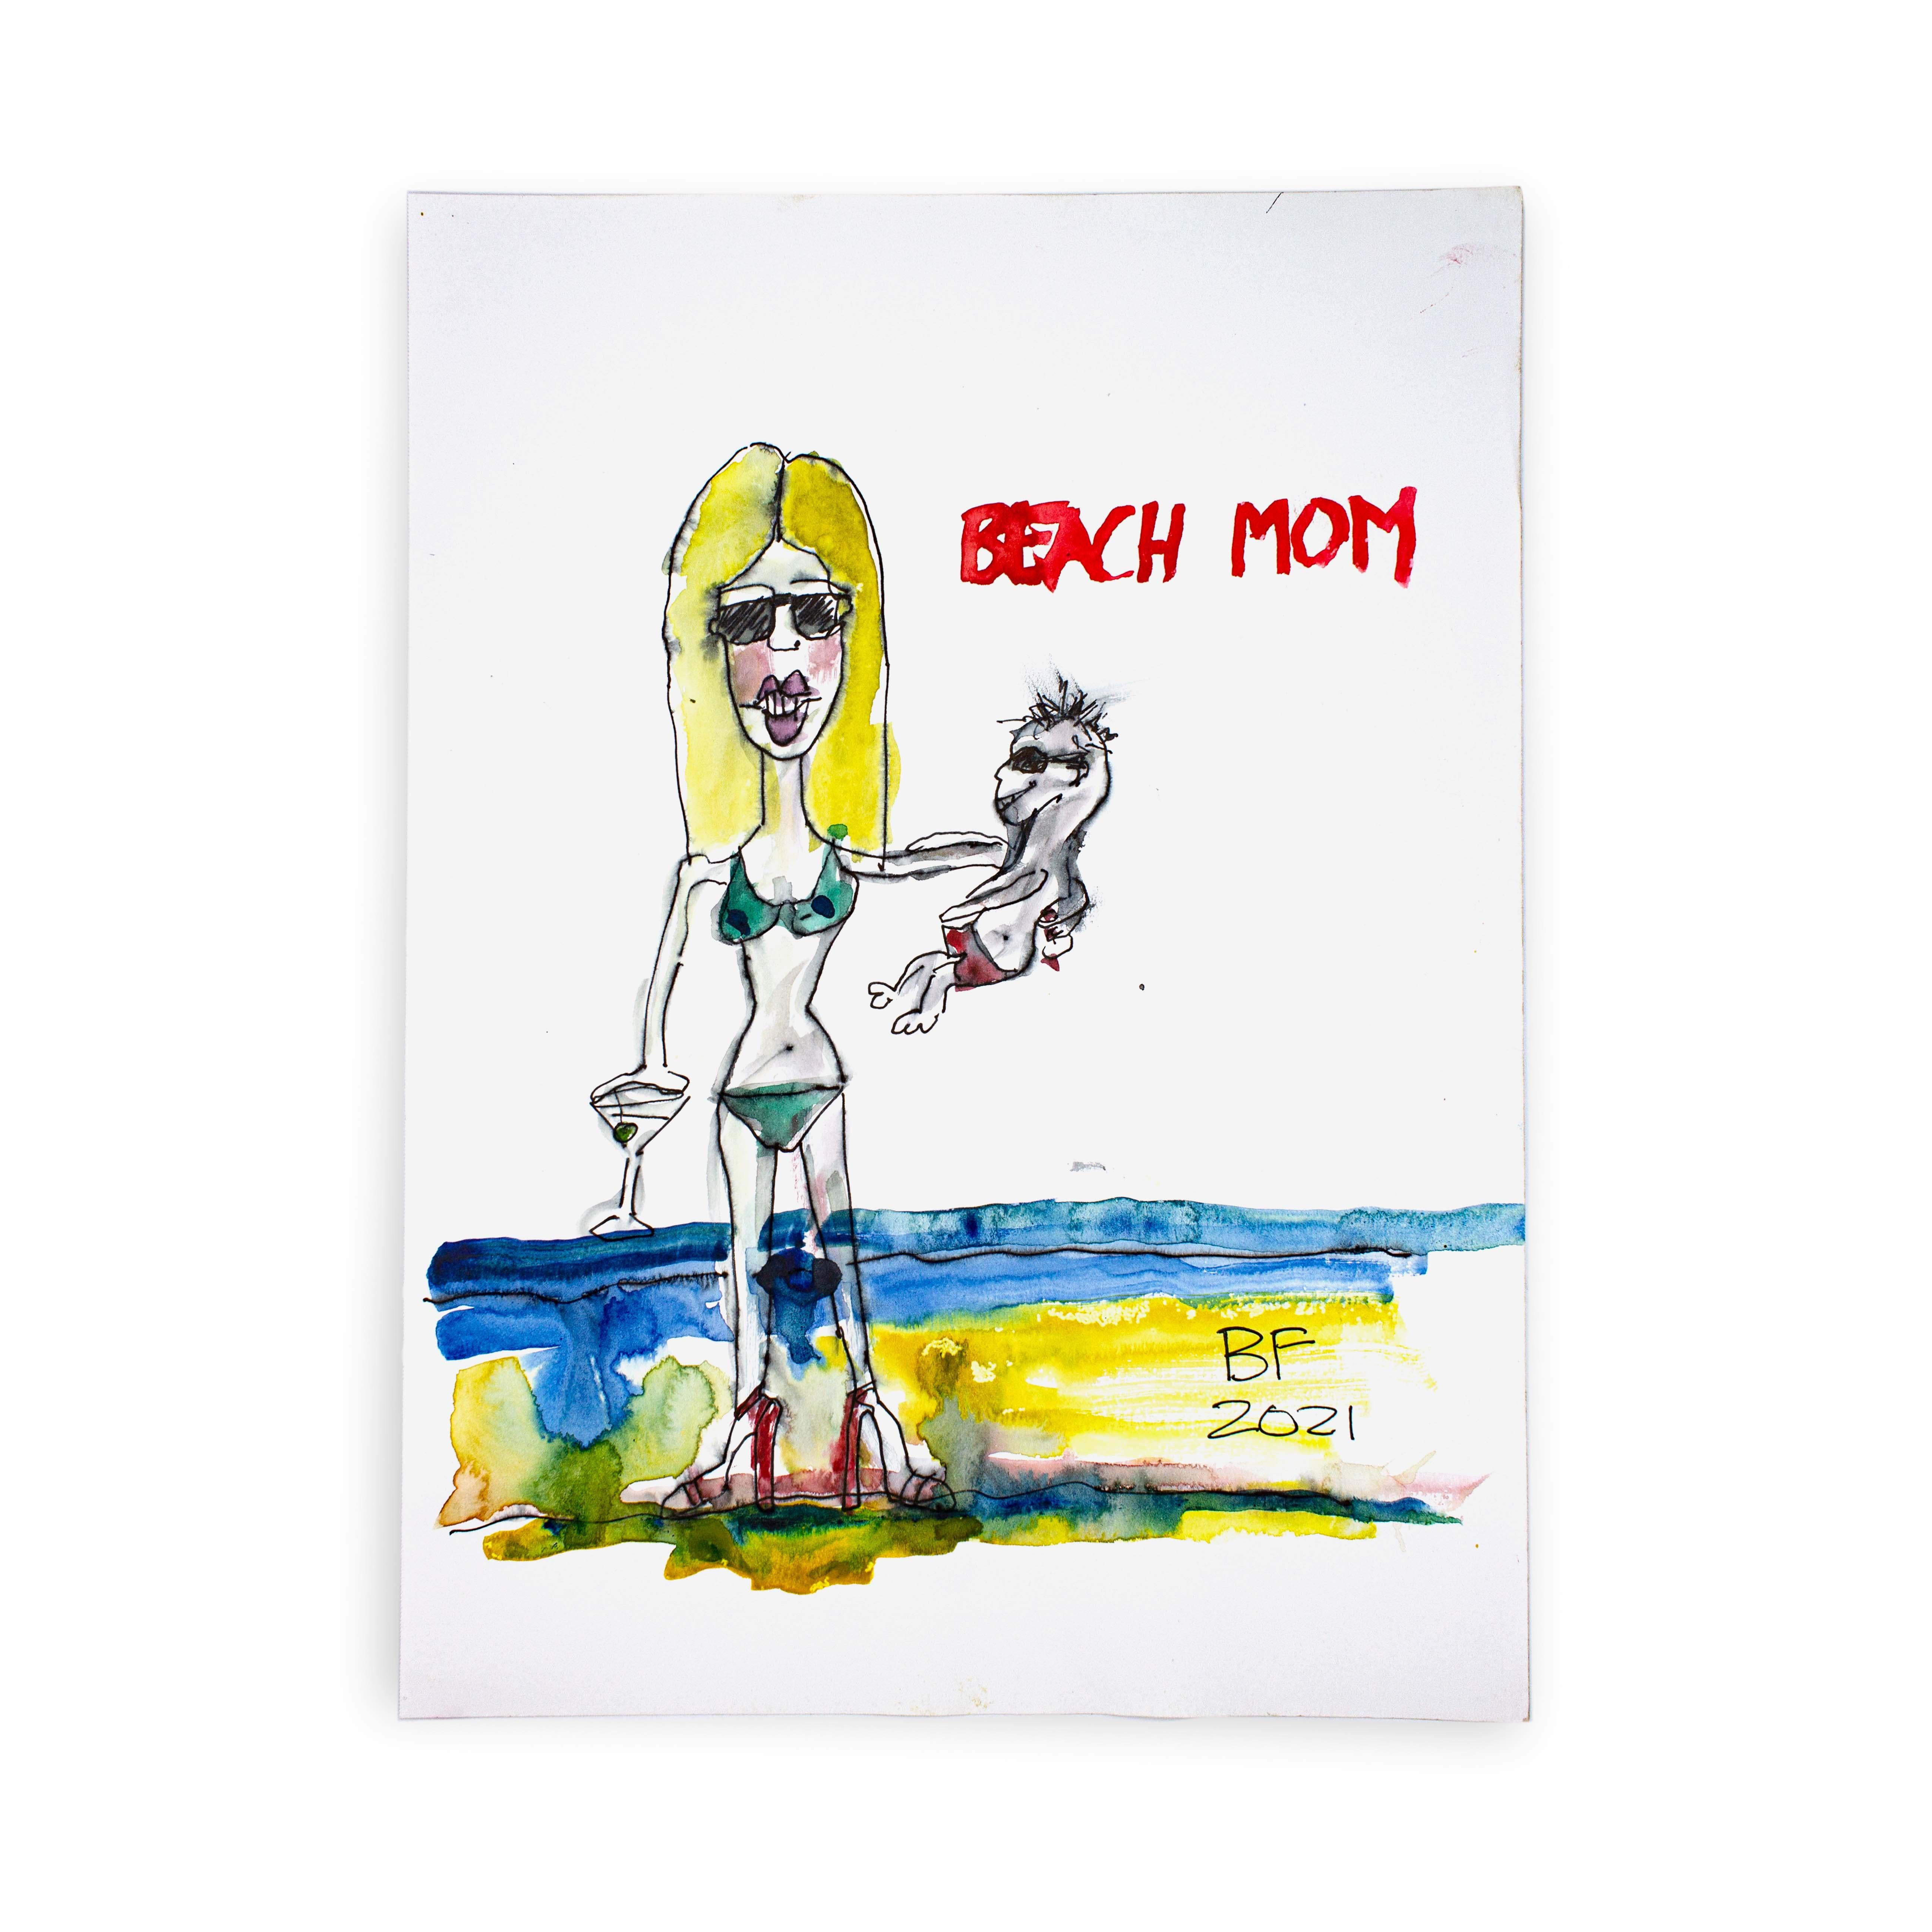 Beach Mom, 2021

Ink and Japanese watercolor on paper by artist Brad Fisher. Unframed.

12 × 9 in

Shipping is not included. See our shipping policies. Please contact us for shipping quotes and customization options. 
 
All sales are final.